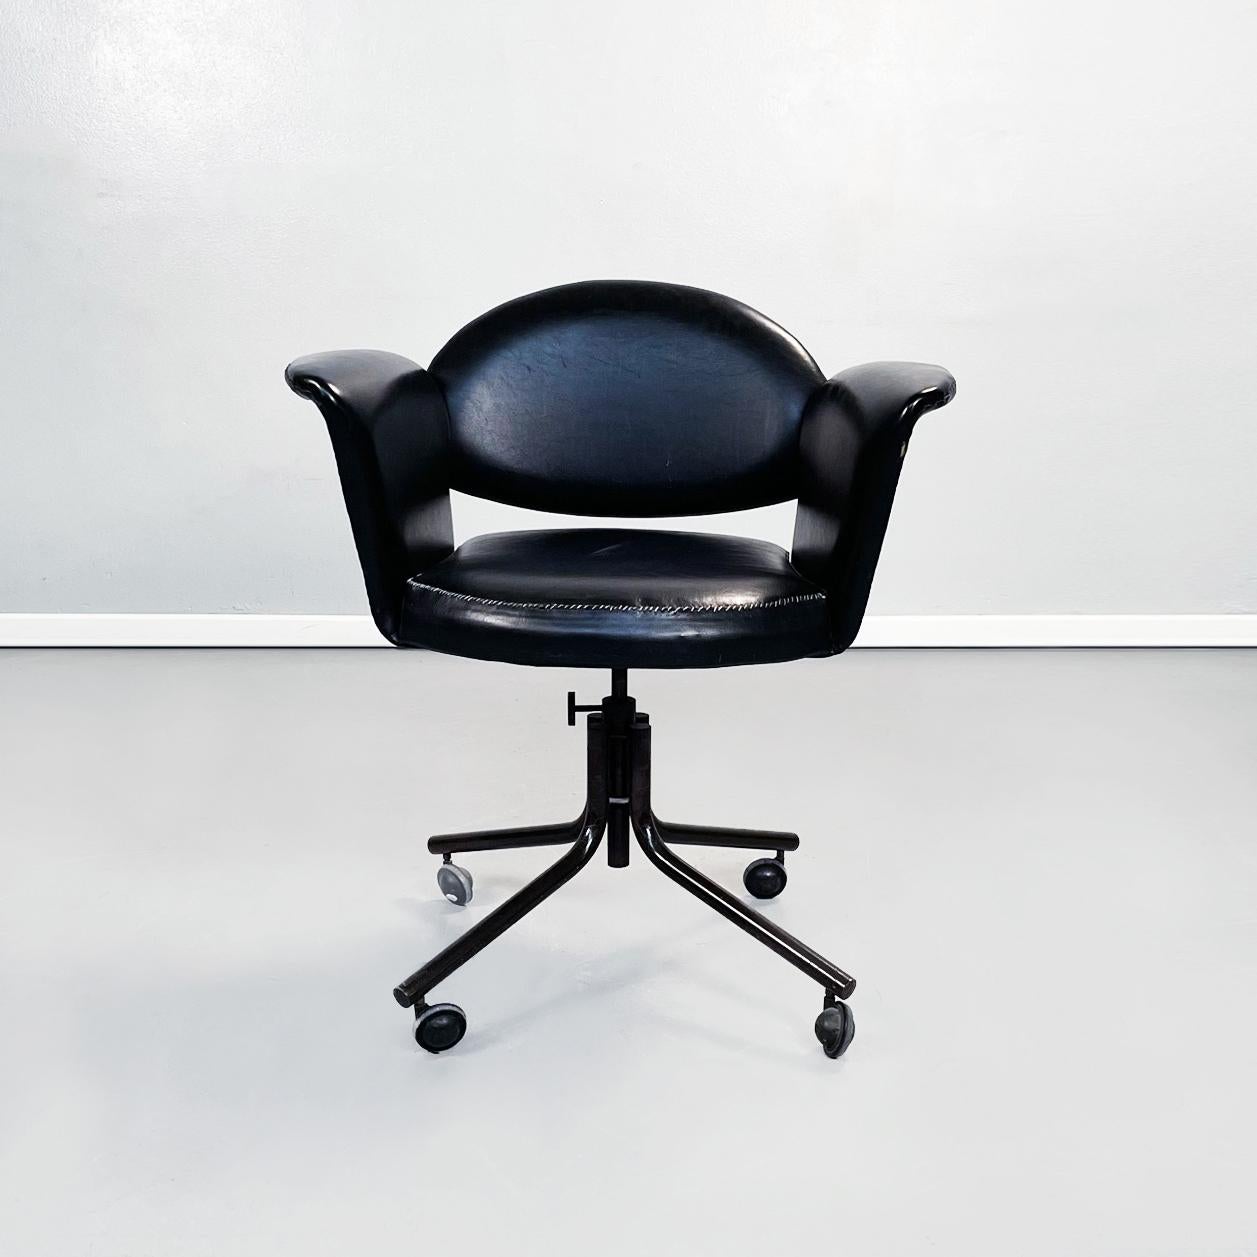 Italian Mid-Century Modern armchair in black leather and black metal, 1970s
Armchair in black leather with round padded seat. The padded back is in the shape of a semi-circle. On the sides it has two curved and slightly padded armrests. 
Exposed